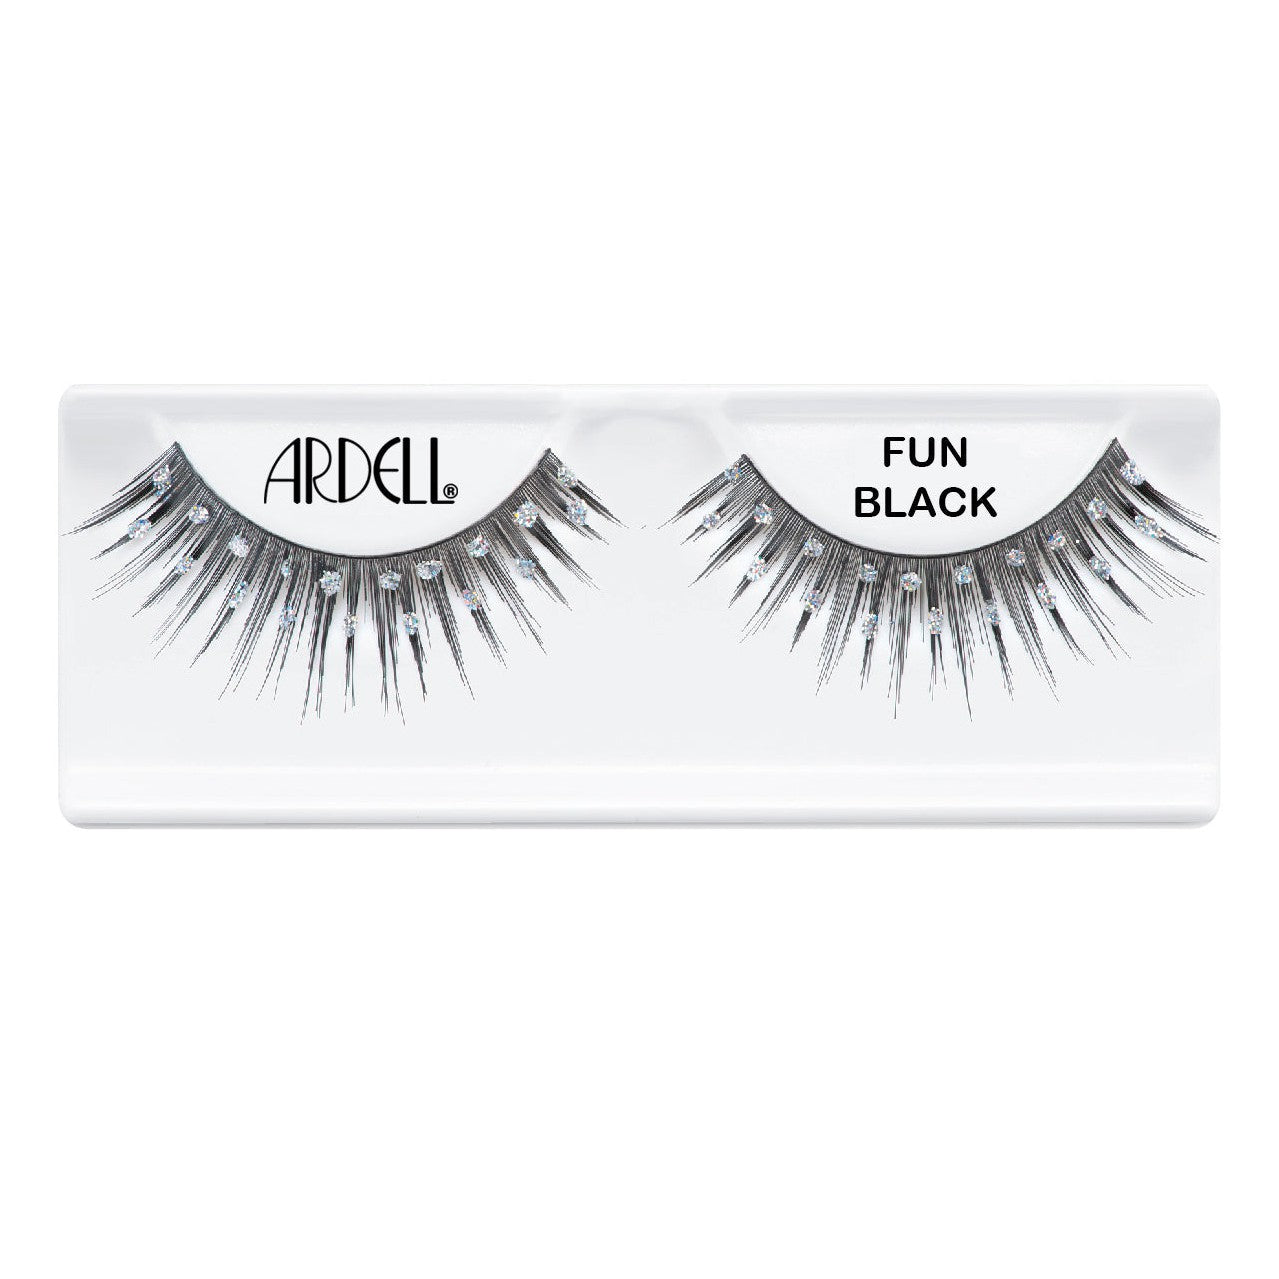 Ardell Fun Holographic Lashes